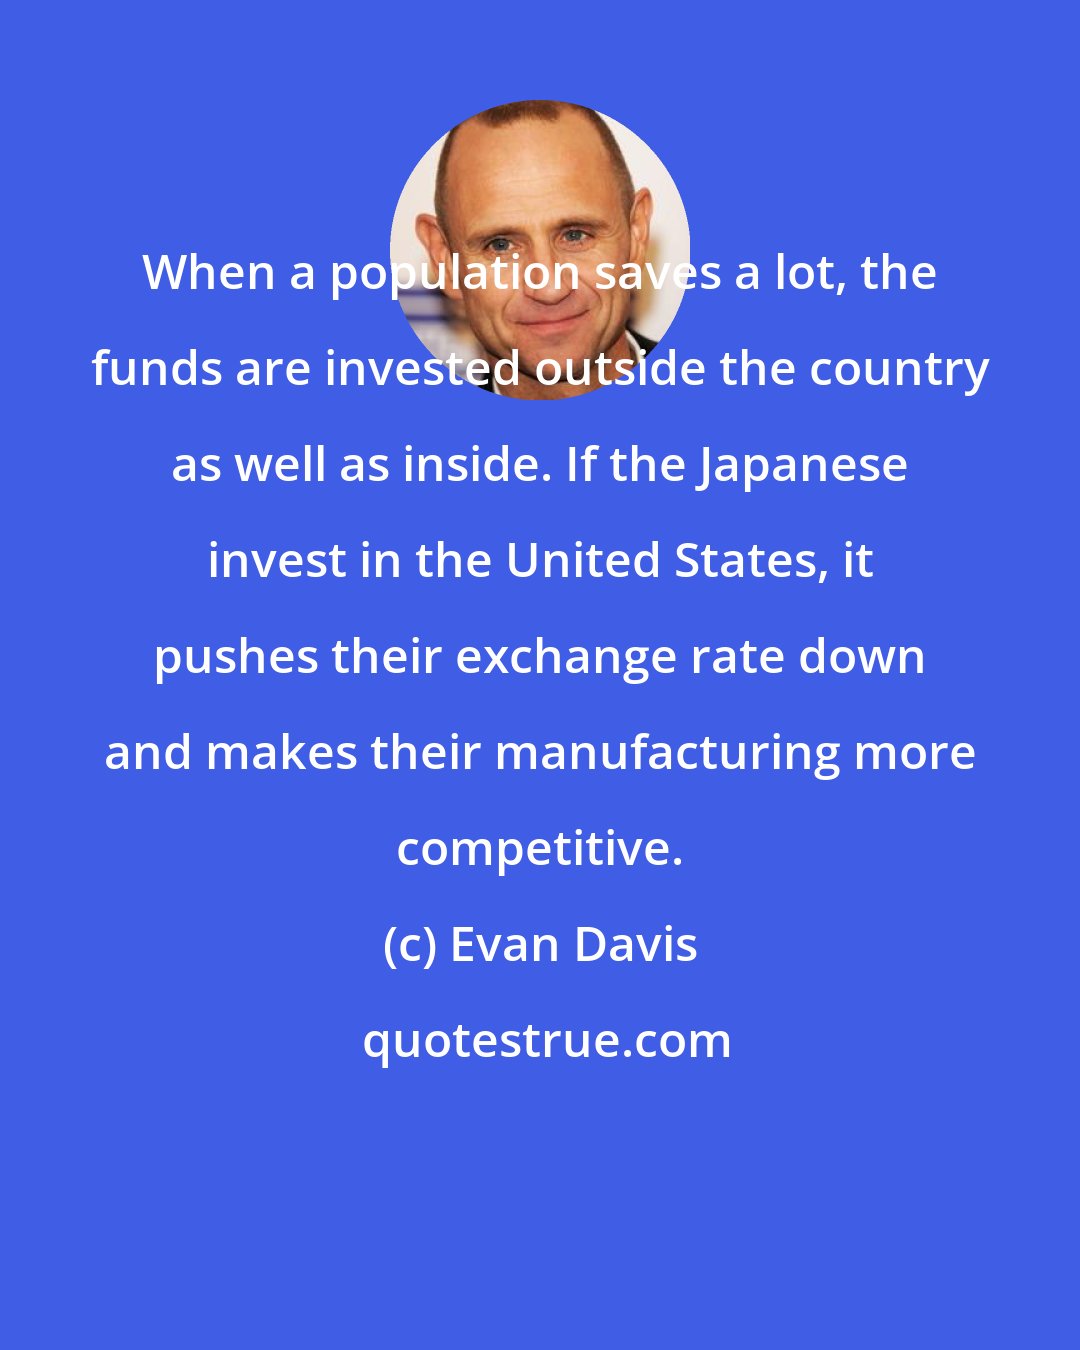 Evan Davis: When a population saves a lot, the funds are invested outside the country as well as inside. If the Japanese invest in the United States, it pushes their exchange rate down and makes their manufacturing more competitive.